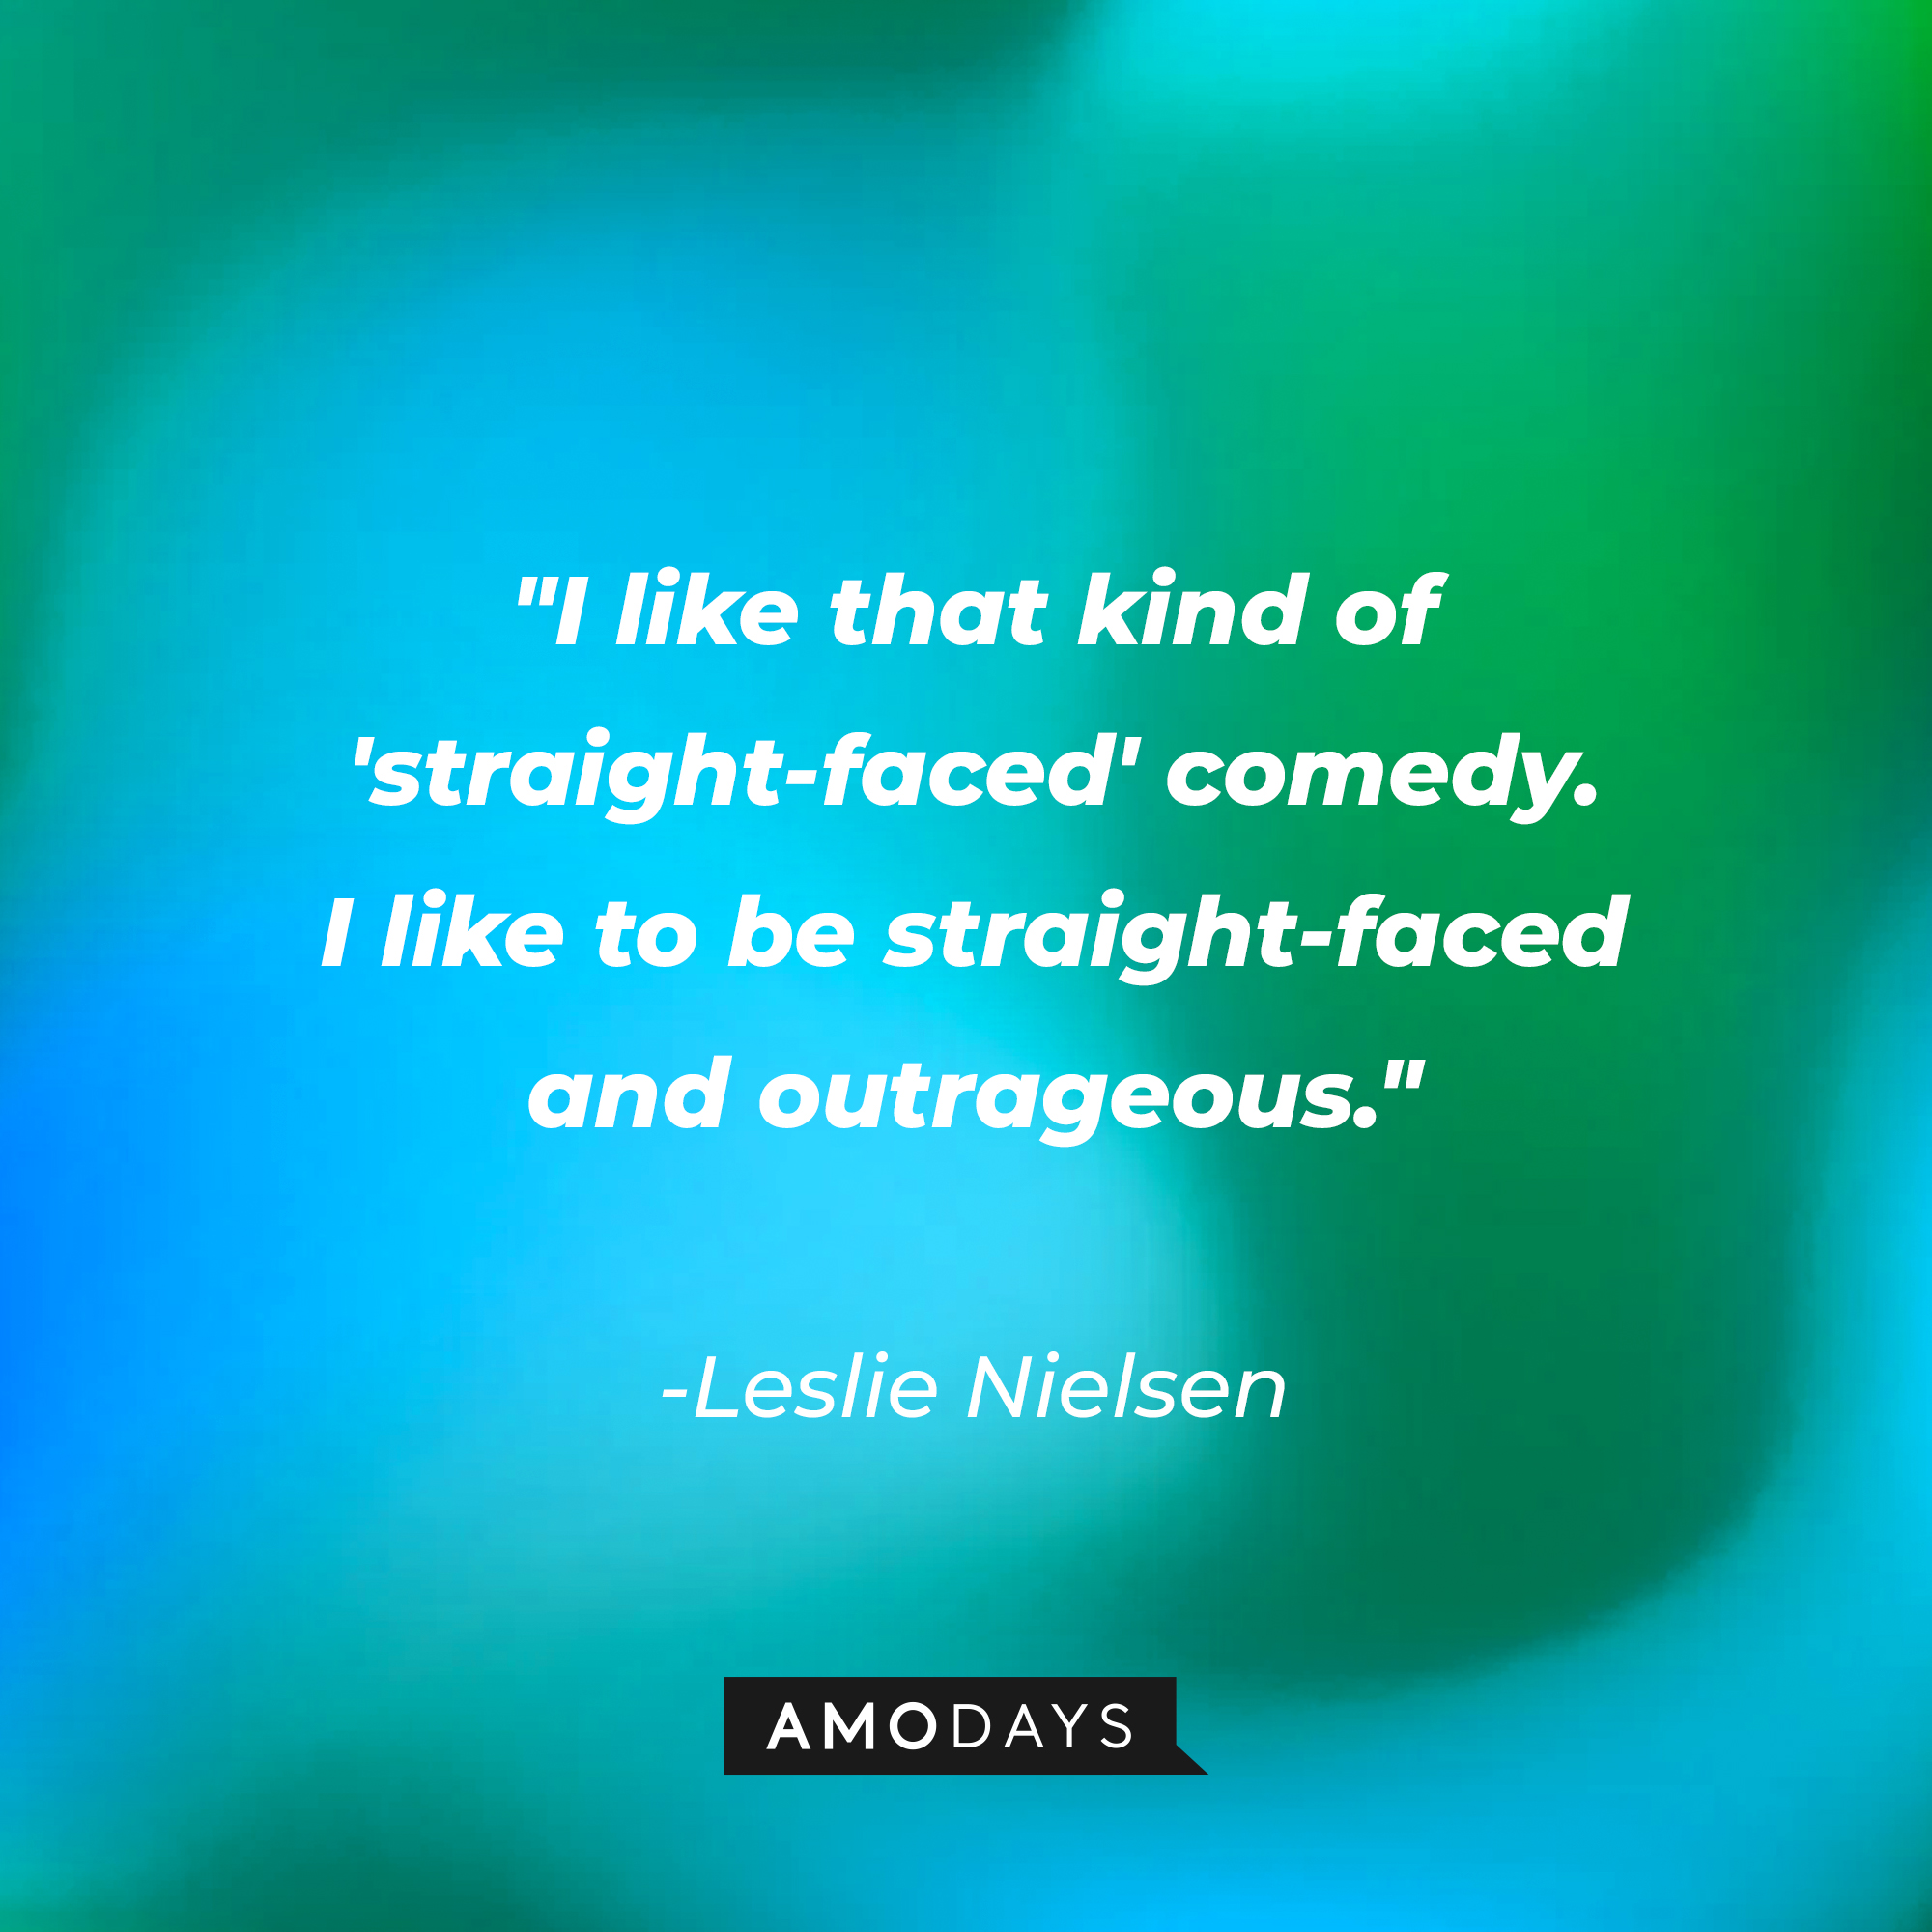 Leslie Nielsen's quote: "I like that kind of 'straight-faced' comedy. I like to be straight-faced and outrageous." | Source: Amodays